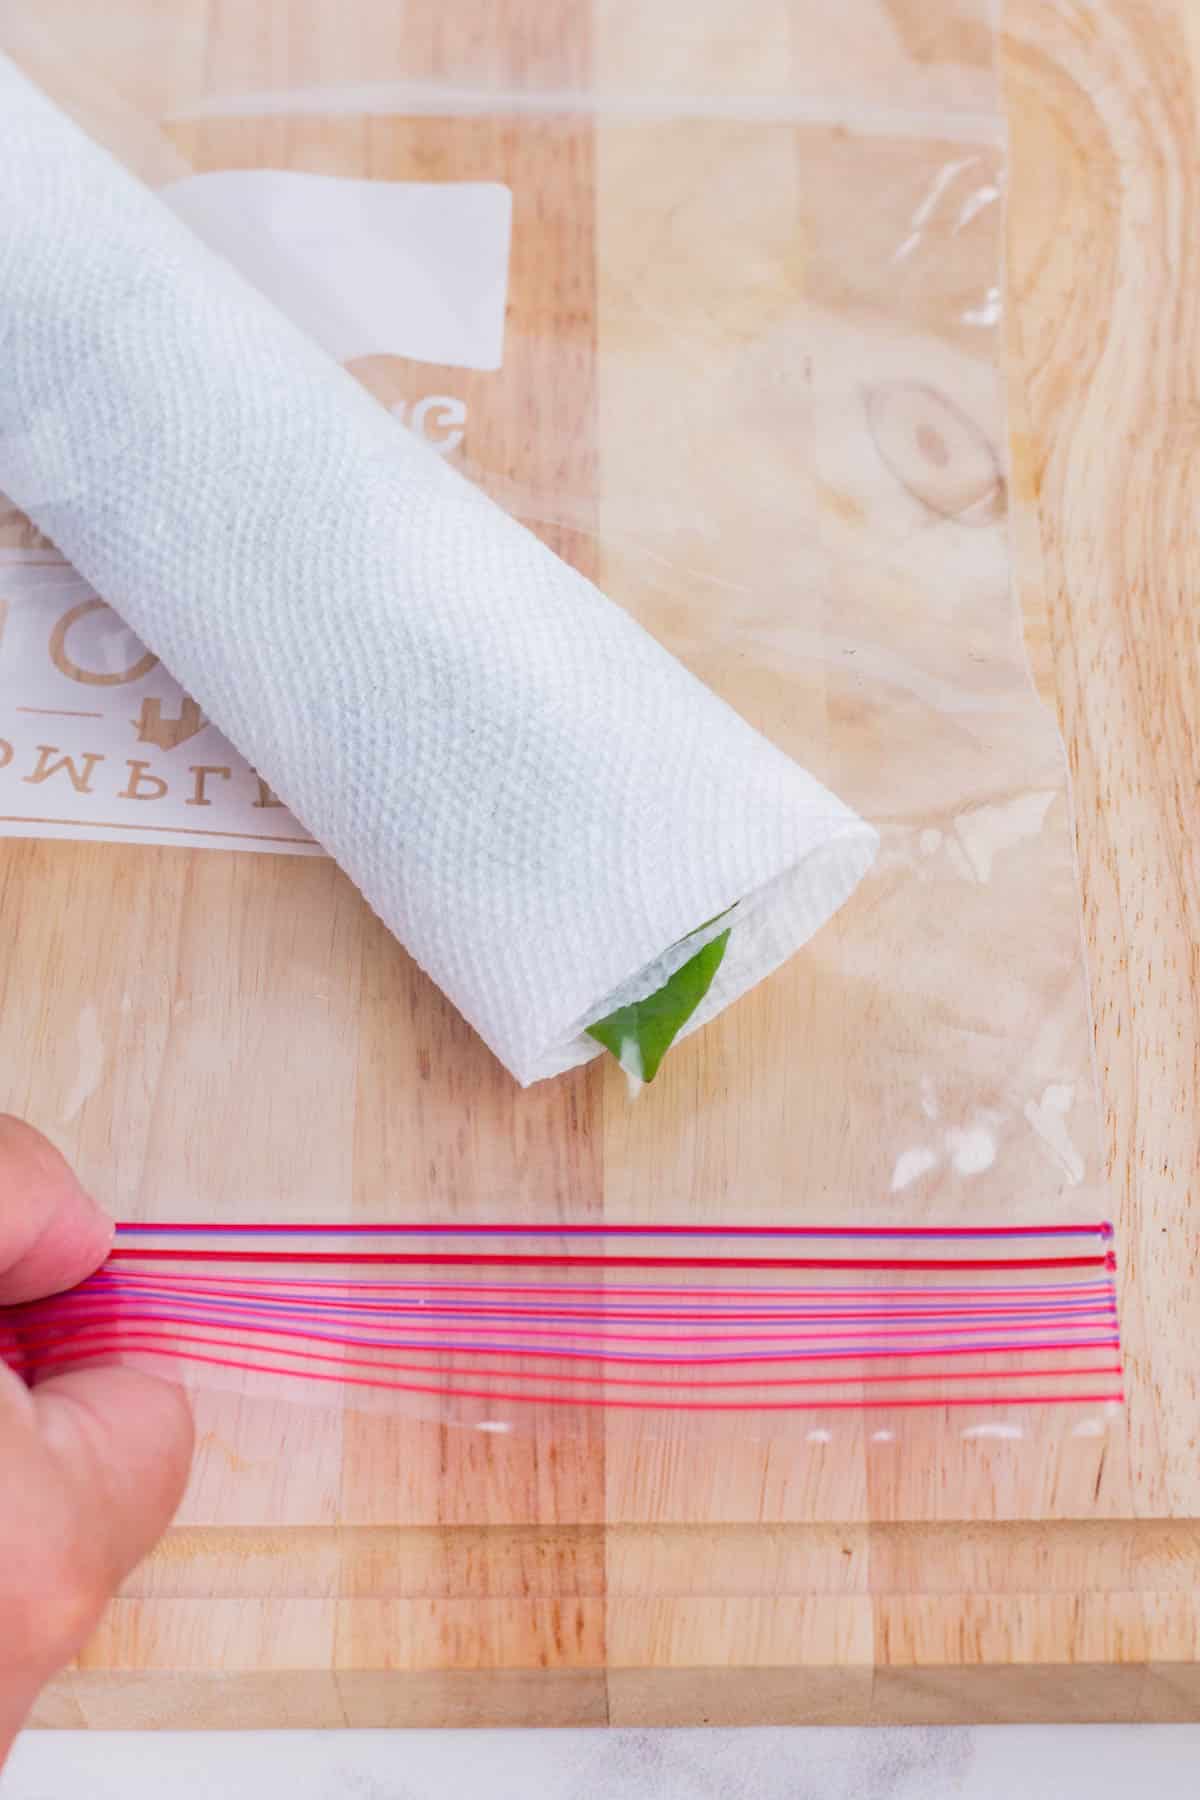 Fresh basil leaves rolled up in a dry paper towel inside a plastic bag.